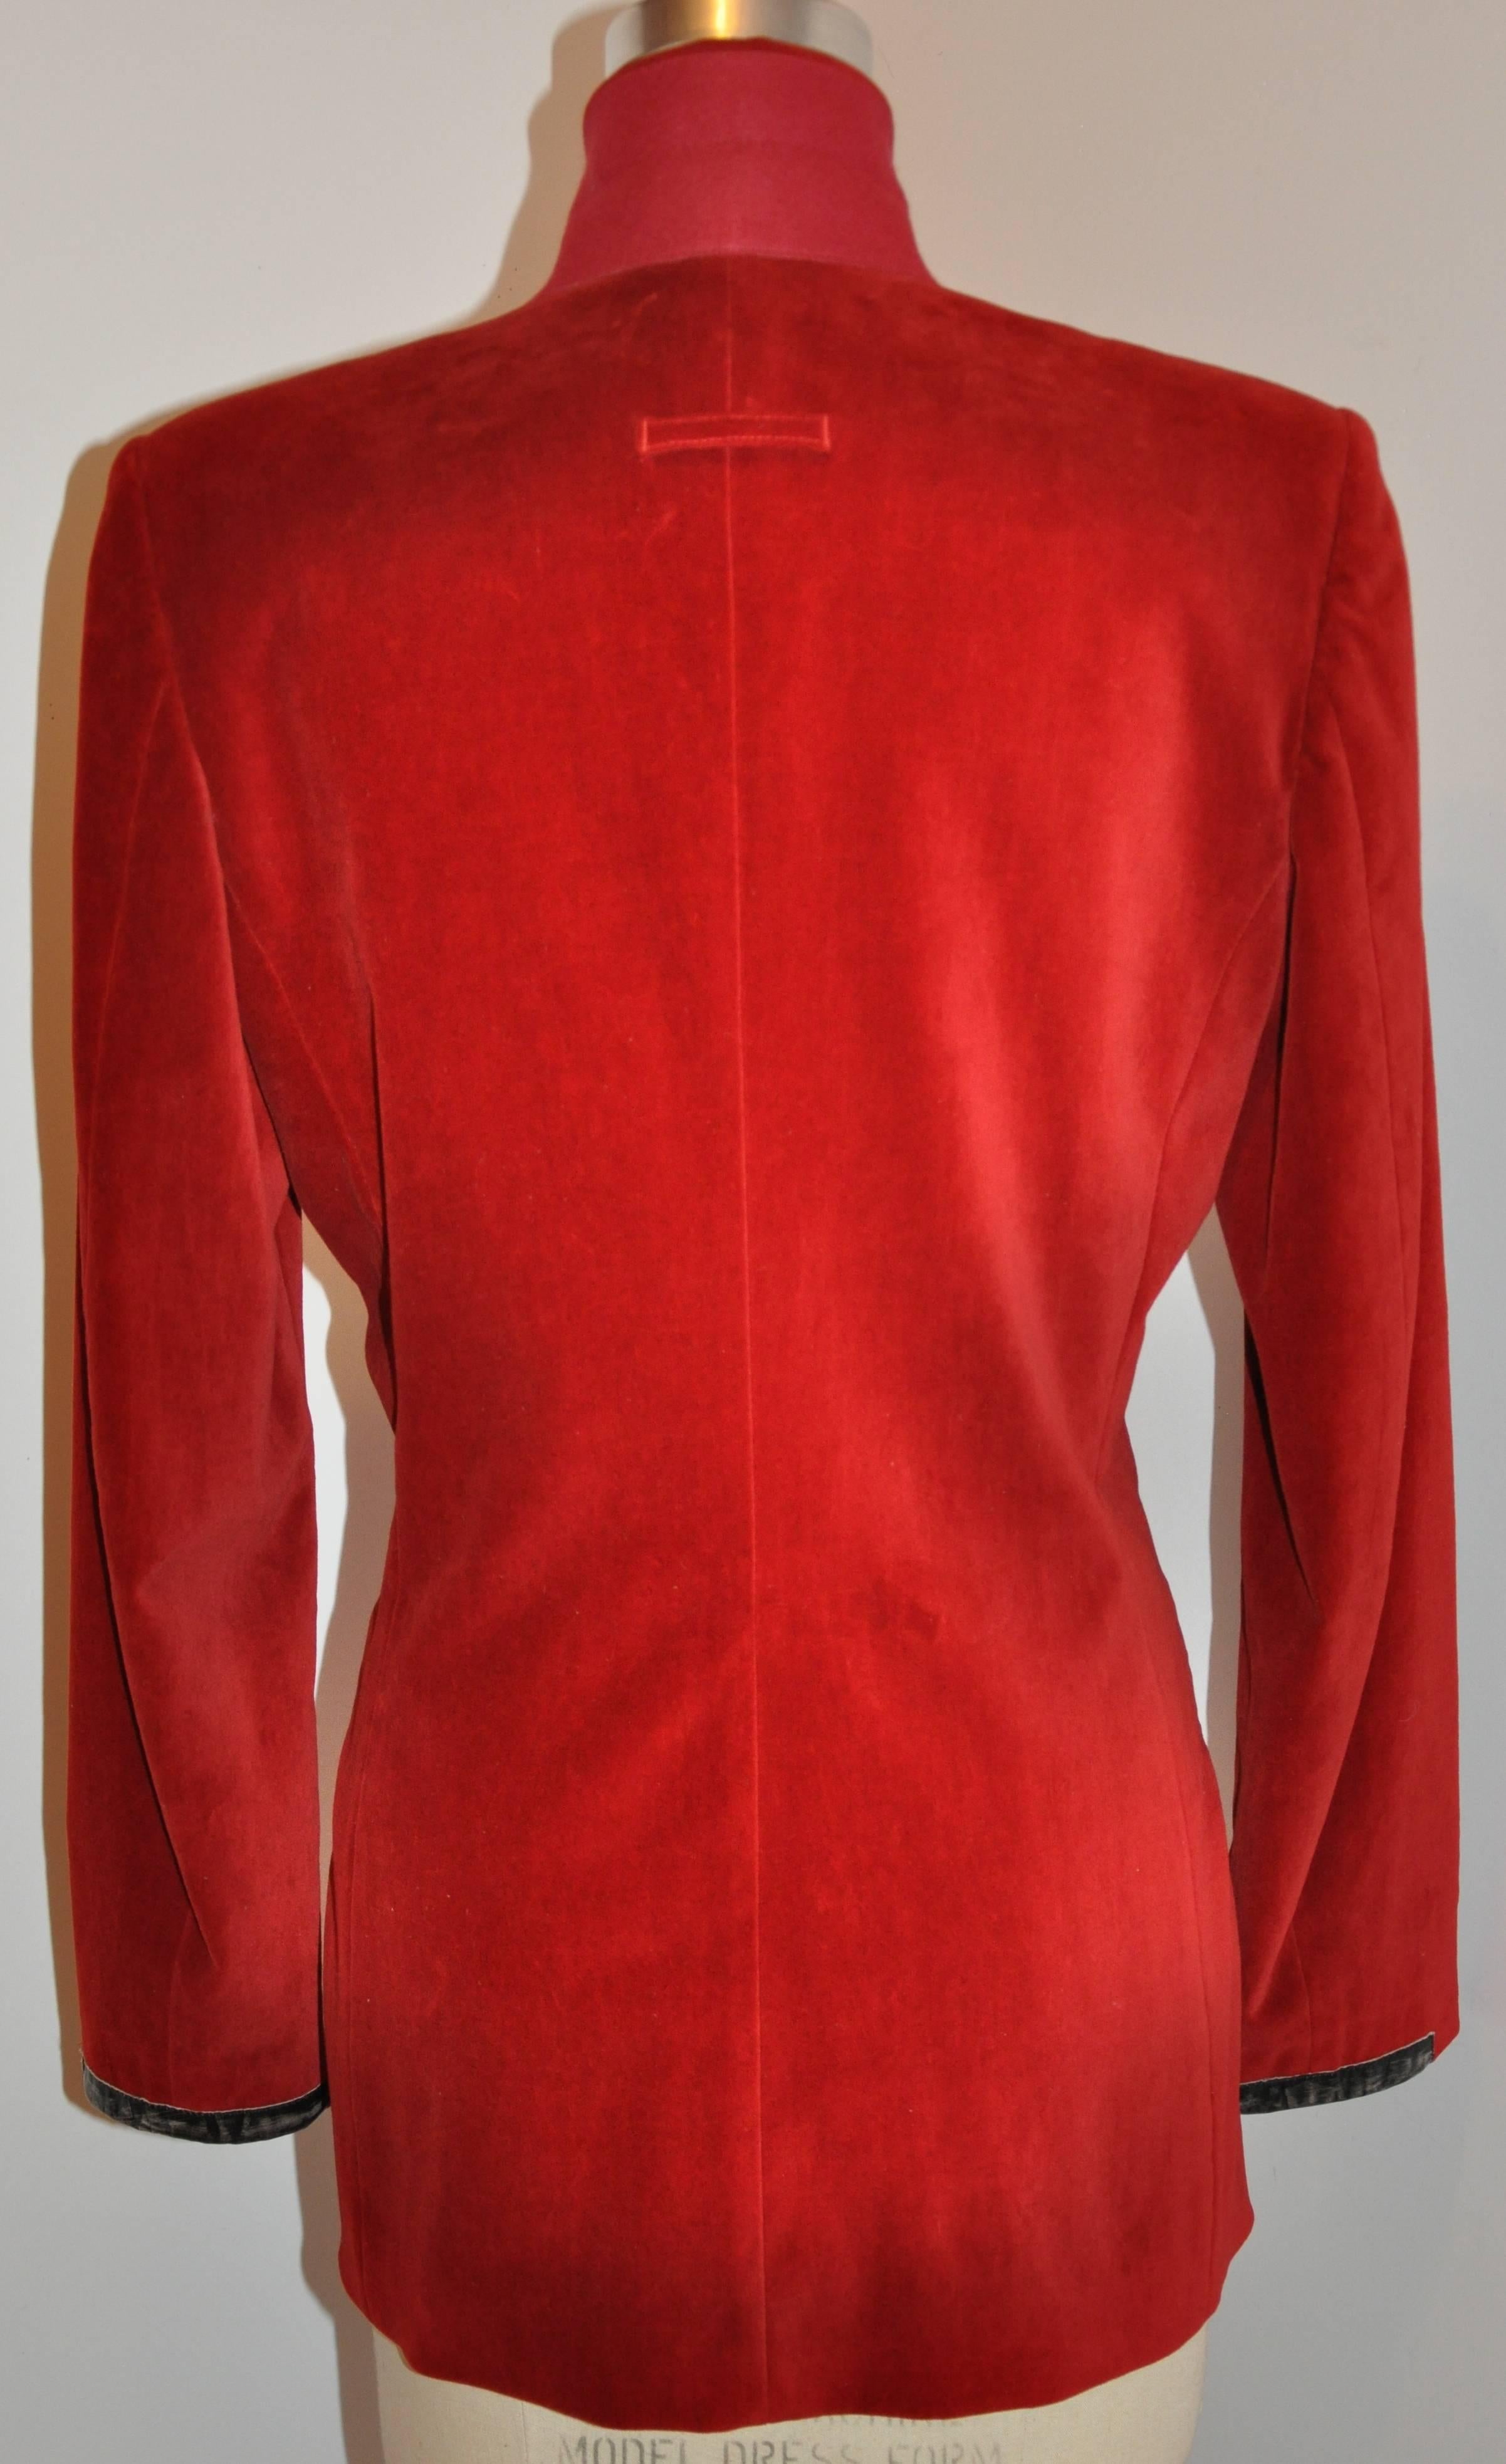           Jean Paul Gaultier wonderfully wicked crimson red brushed cotton velvet jacket is fully lined and detailed with distressed leather within the pockets, collar and cuffs.Underneath the collar is detailed with felted wool as well as a single